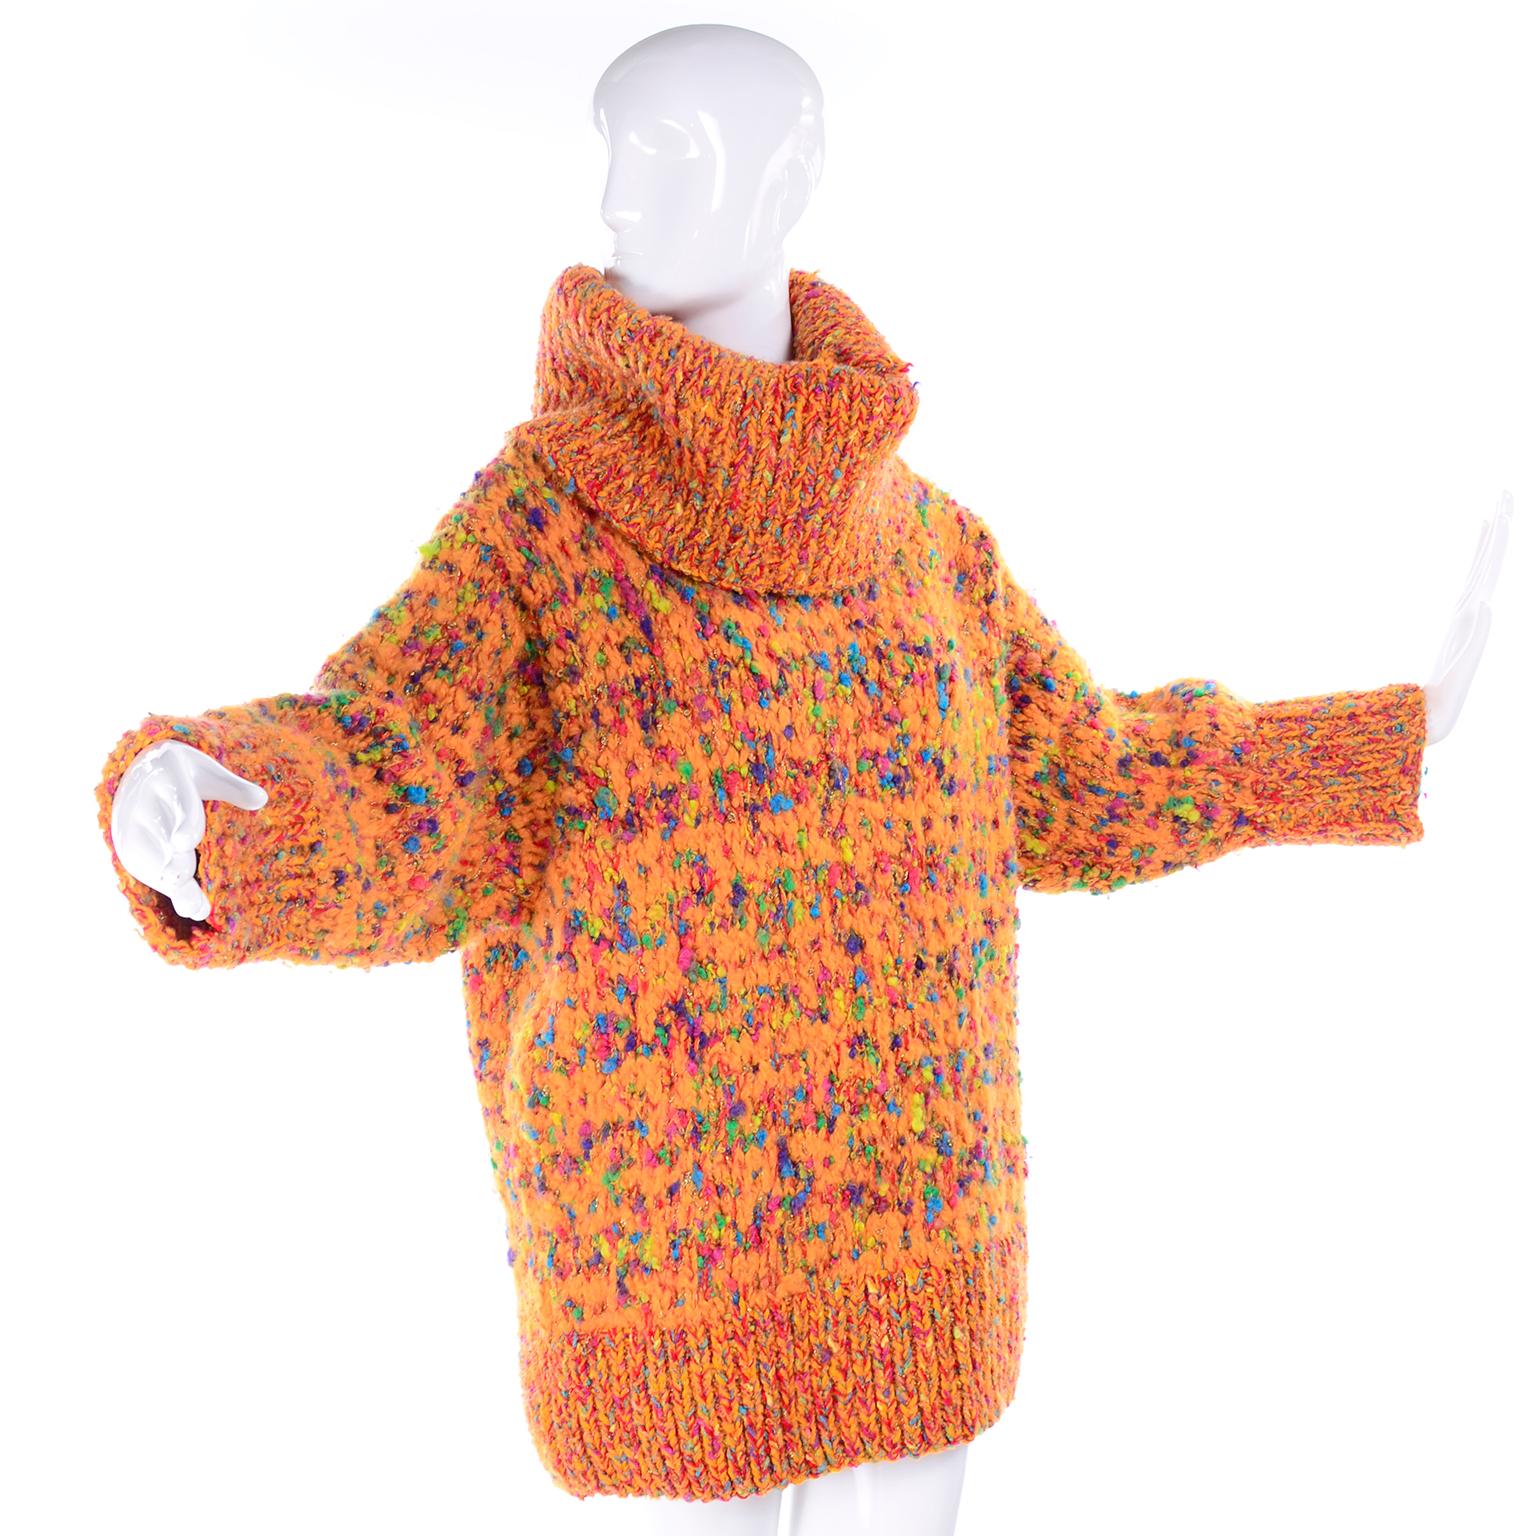 We fell in love with this amazing oversized vintage Anne Klein sweater the minute we found it! This gorgeous nubby wool/rayon/mohair blend turtleneck sweater makes a huge fashion statement and is so lovely in shades of orange, blue, red and yellow.